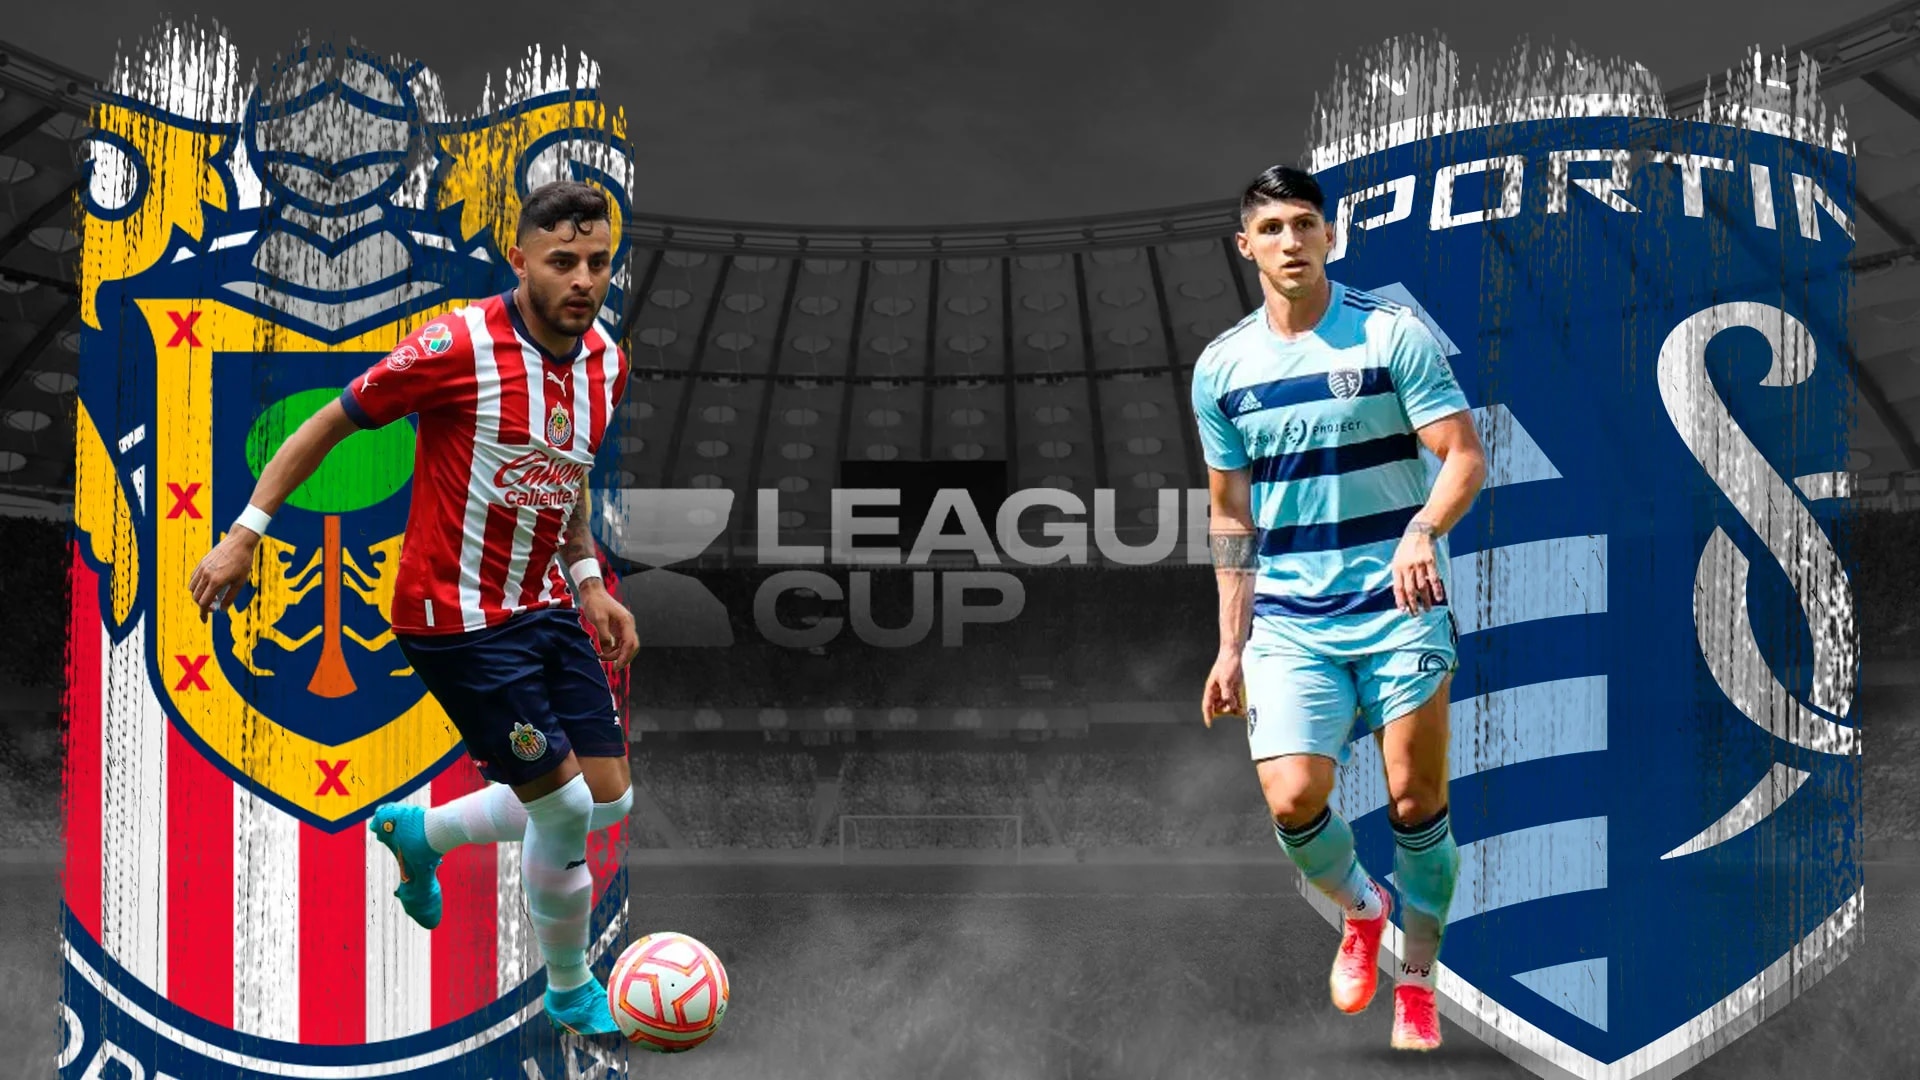 The rojiblanco team has the last opportunity to demonstrate its greatness in the Leagues Cup. (Art: Jovani Pérez)